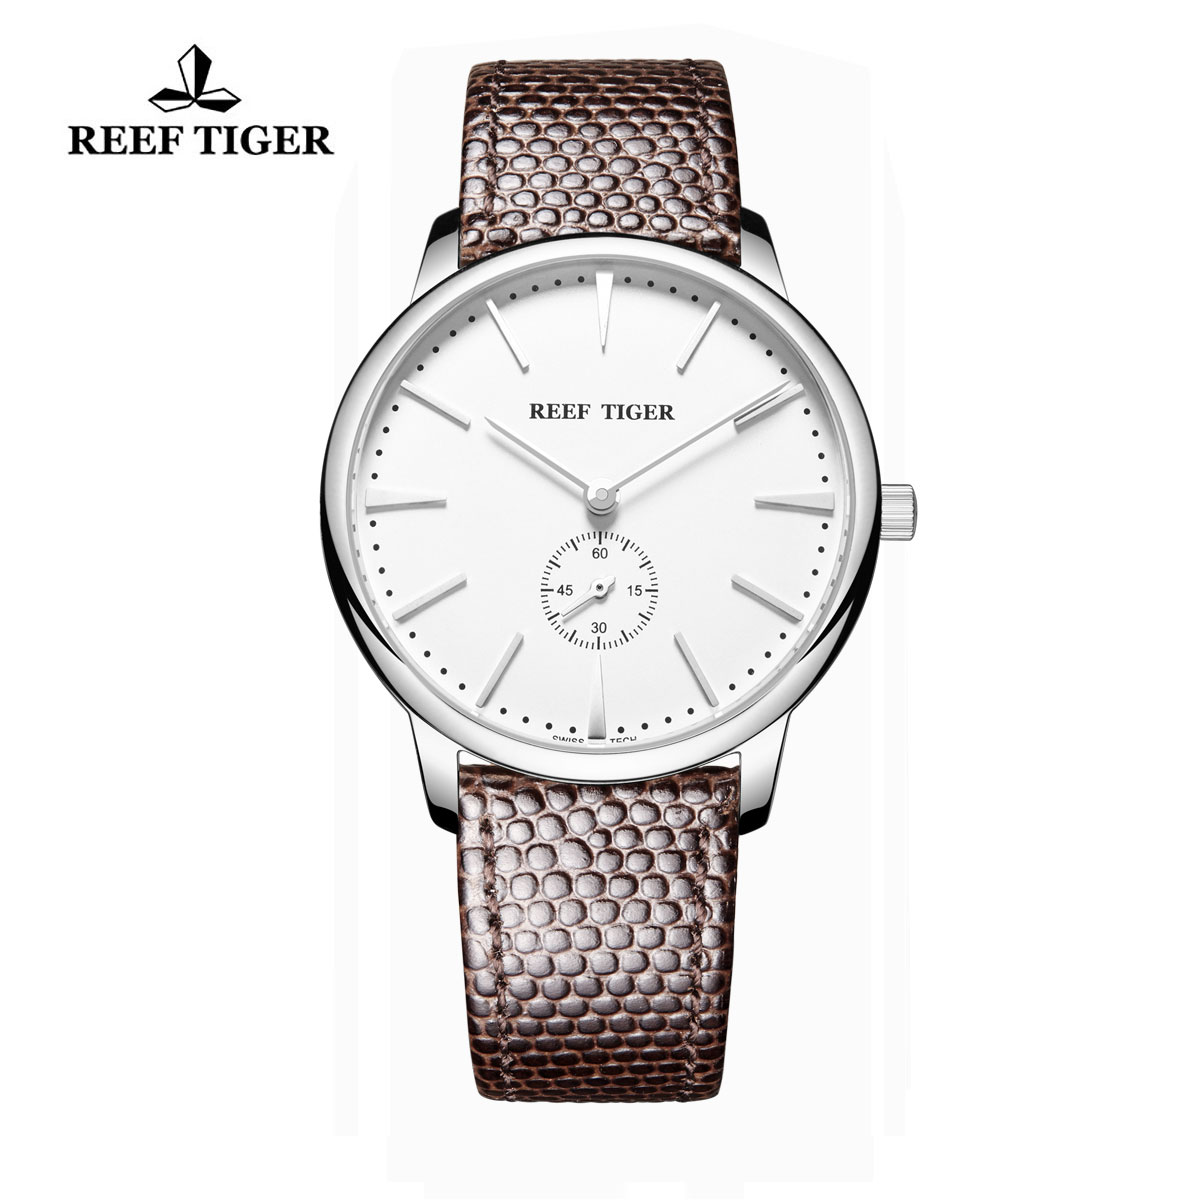 Reef Tiger Vintage Couple Watch White Dial Stainless Steel Calfskin Leather RGA820-YWB